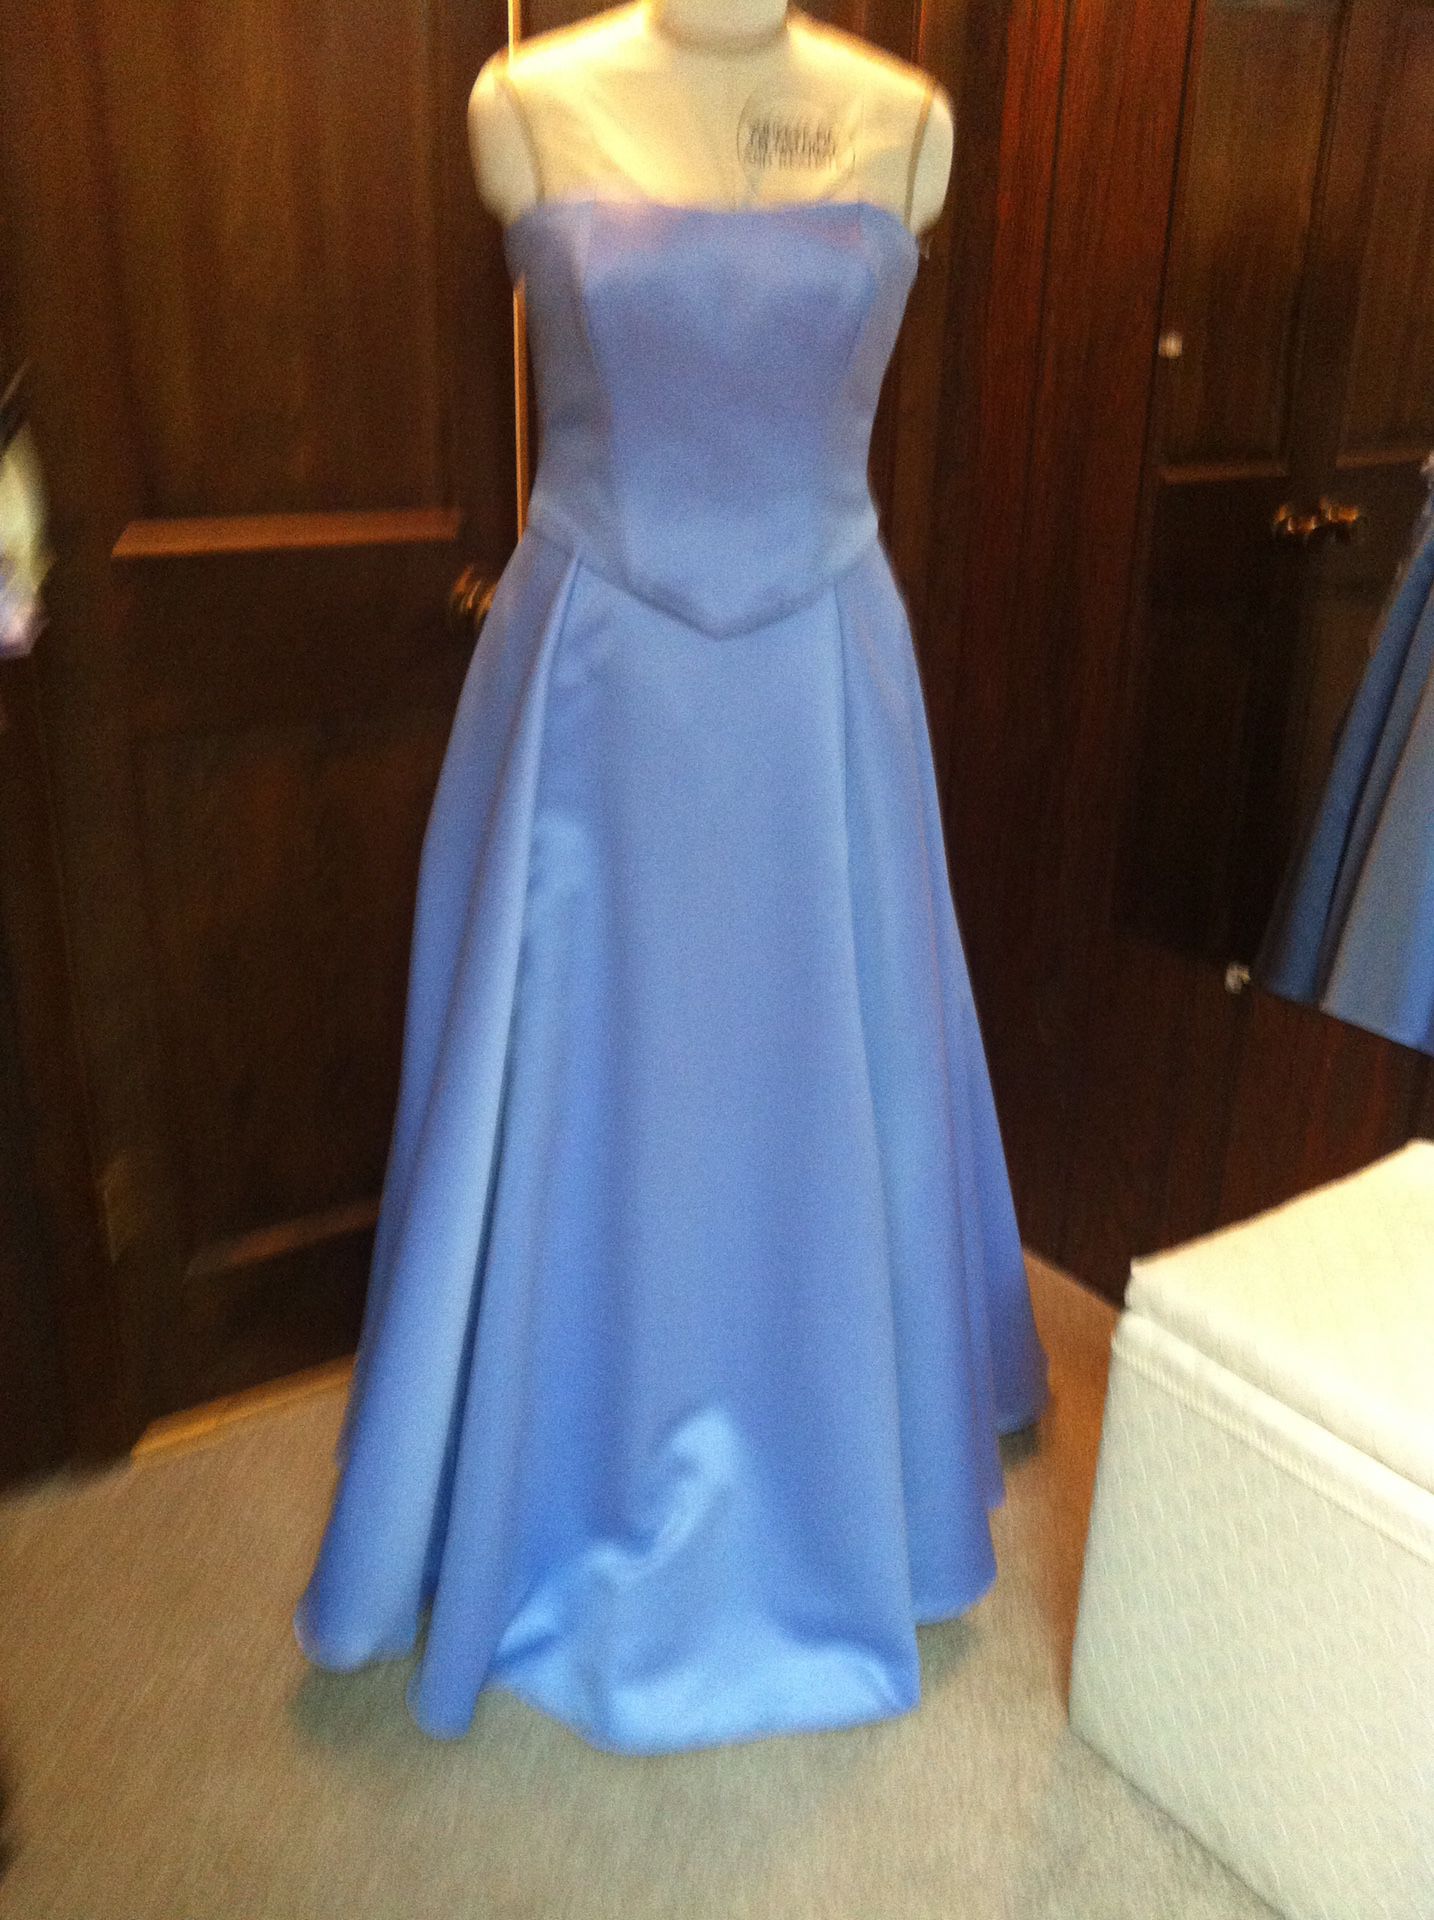 handmade all ocassion dresss great for a wedding. size 12-14